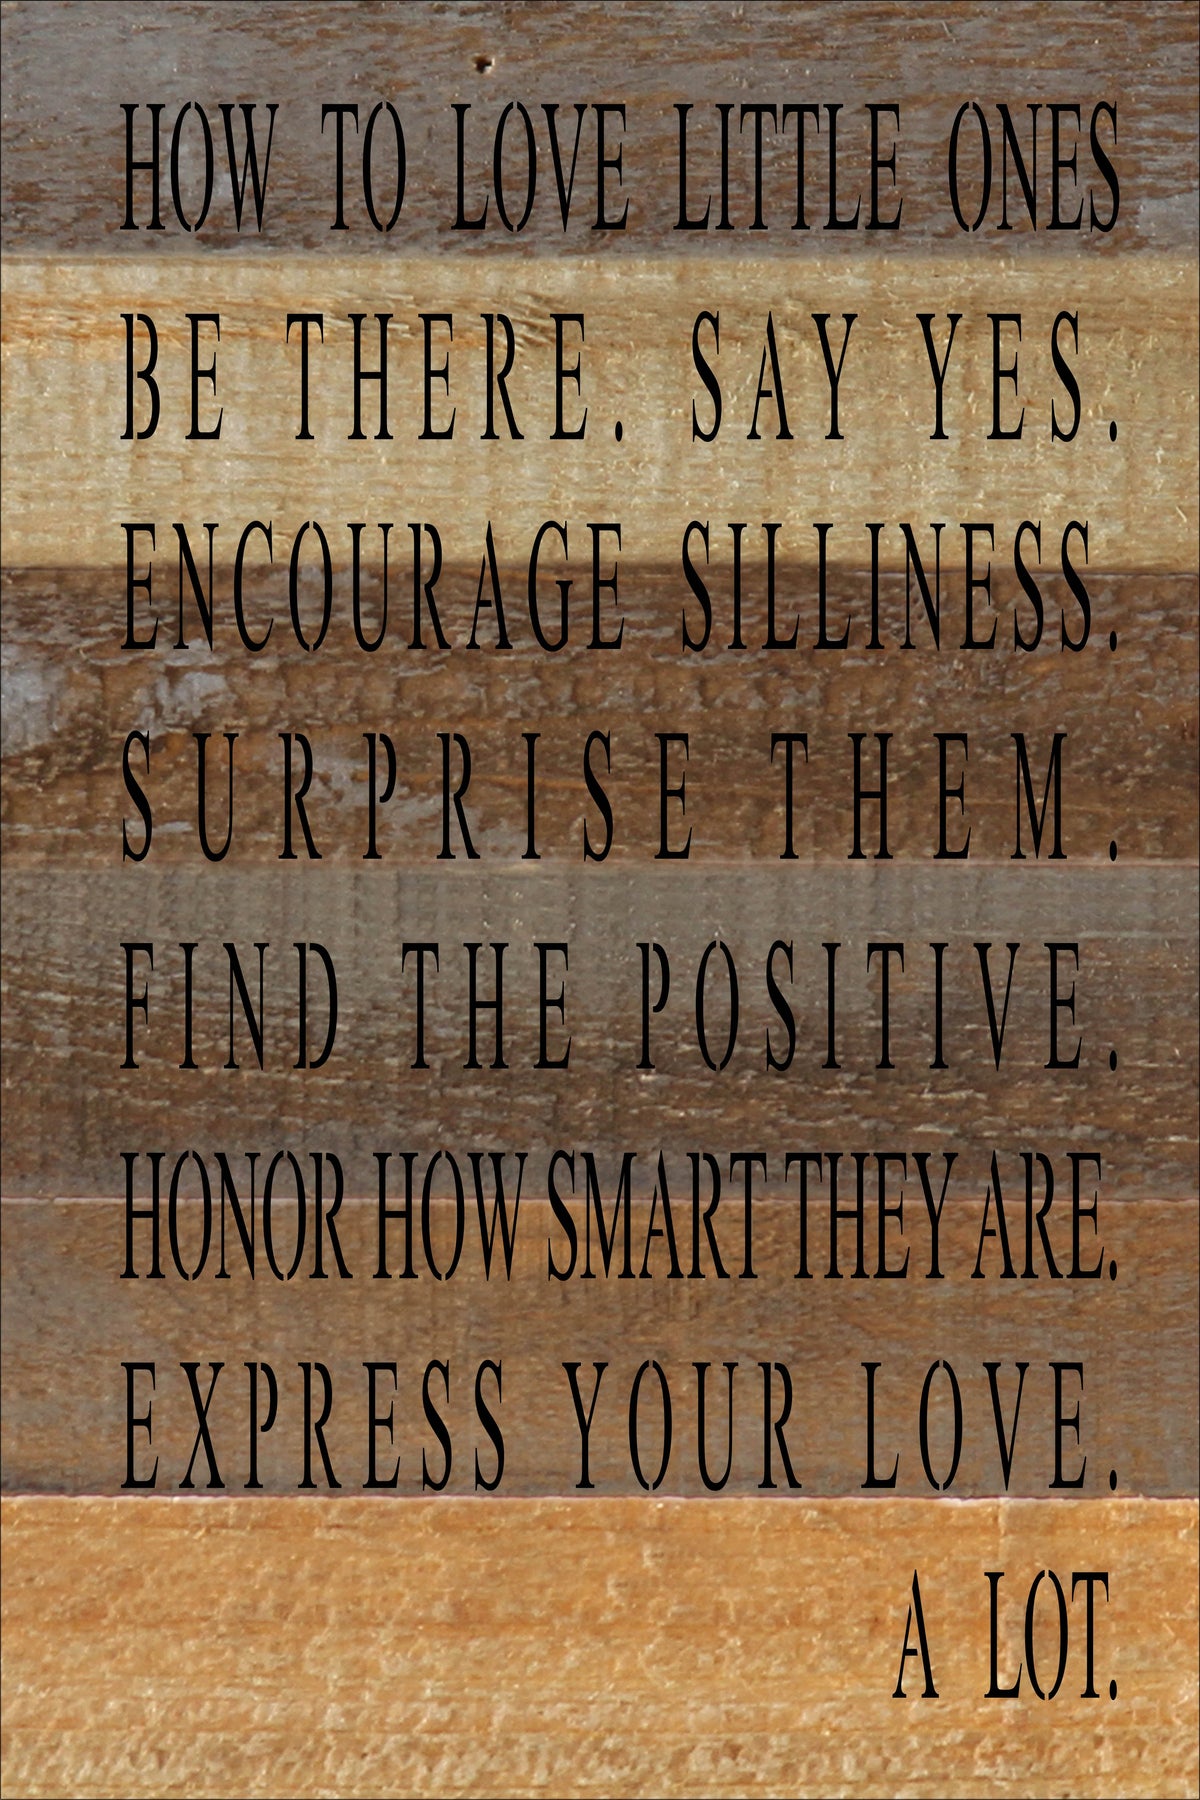 How to love little ones... Be there. Say yes. Encourage silliness... Express your love. A lot. / 12x18 Reclaimed Wood Wall Art